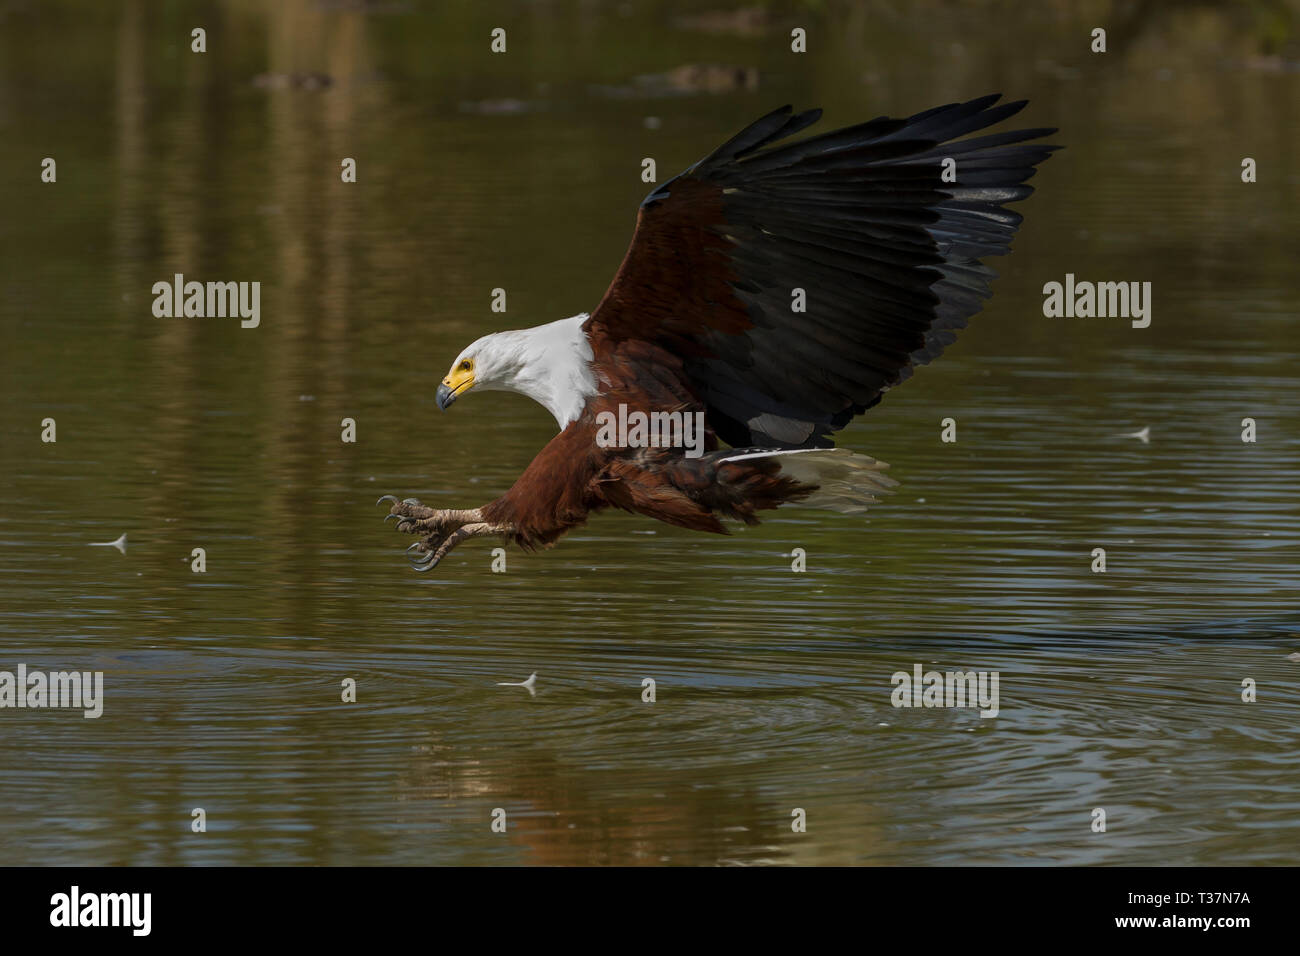 An african fish eagle flying near the surface of a small waterhole, about to strike, talons forward, Ol Pejeta Conservancy, Laikipia, Kenya, Africa Stock Photo